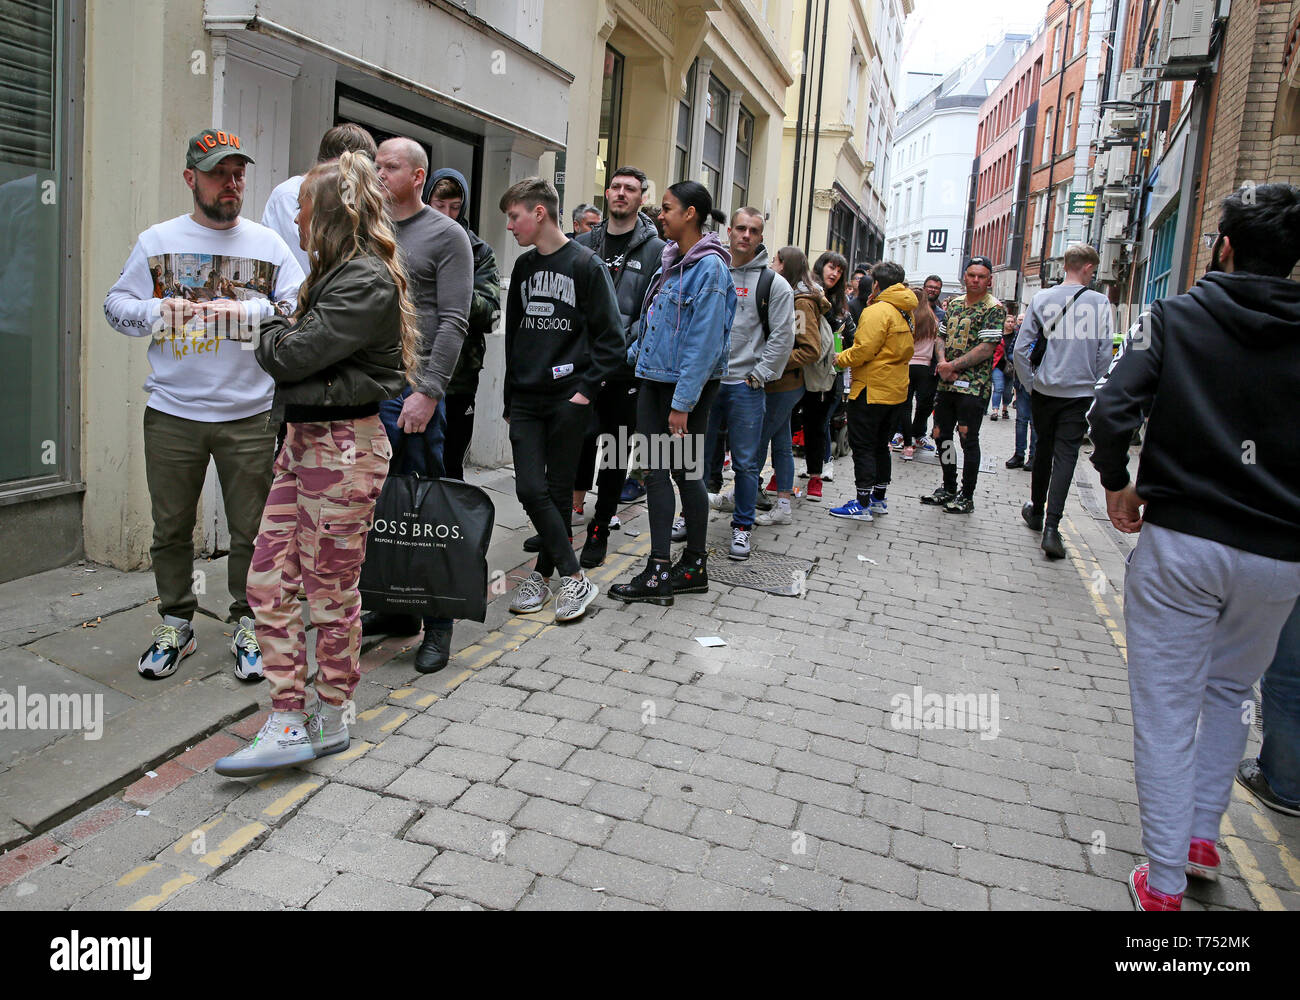 Manchester, UK. 04th May, 2019. Hundreds of people have been queuing around  the block for the Crepe city sneaker festival with over 100 vendors selling  some of the rarest and most desirable